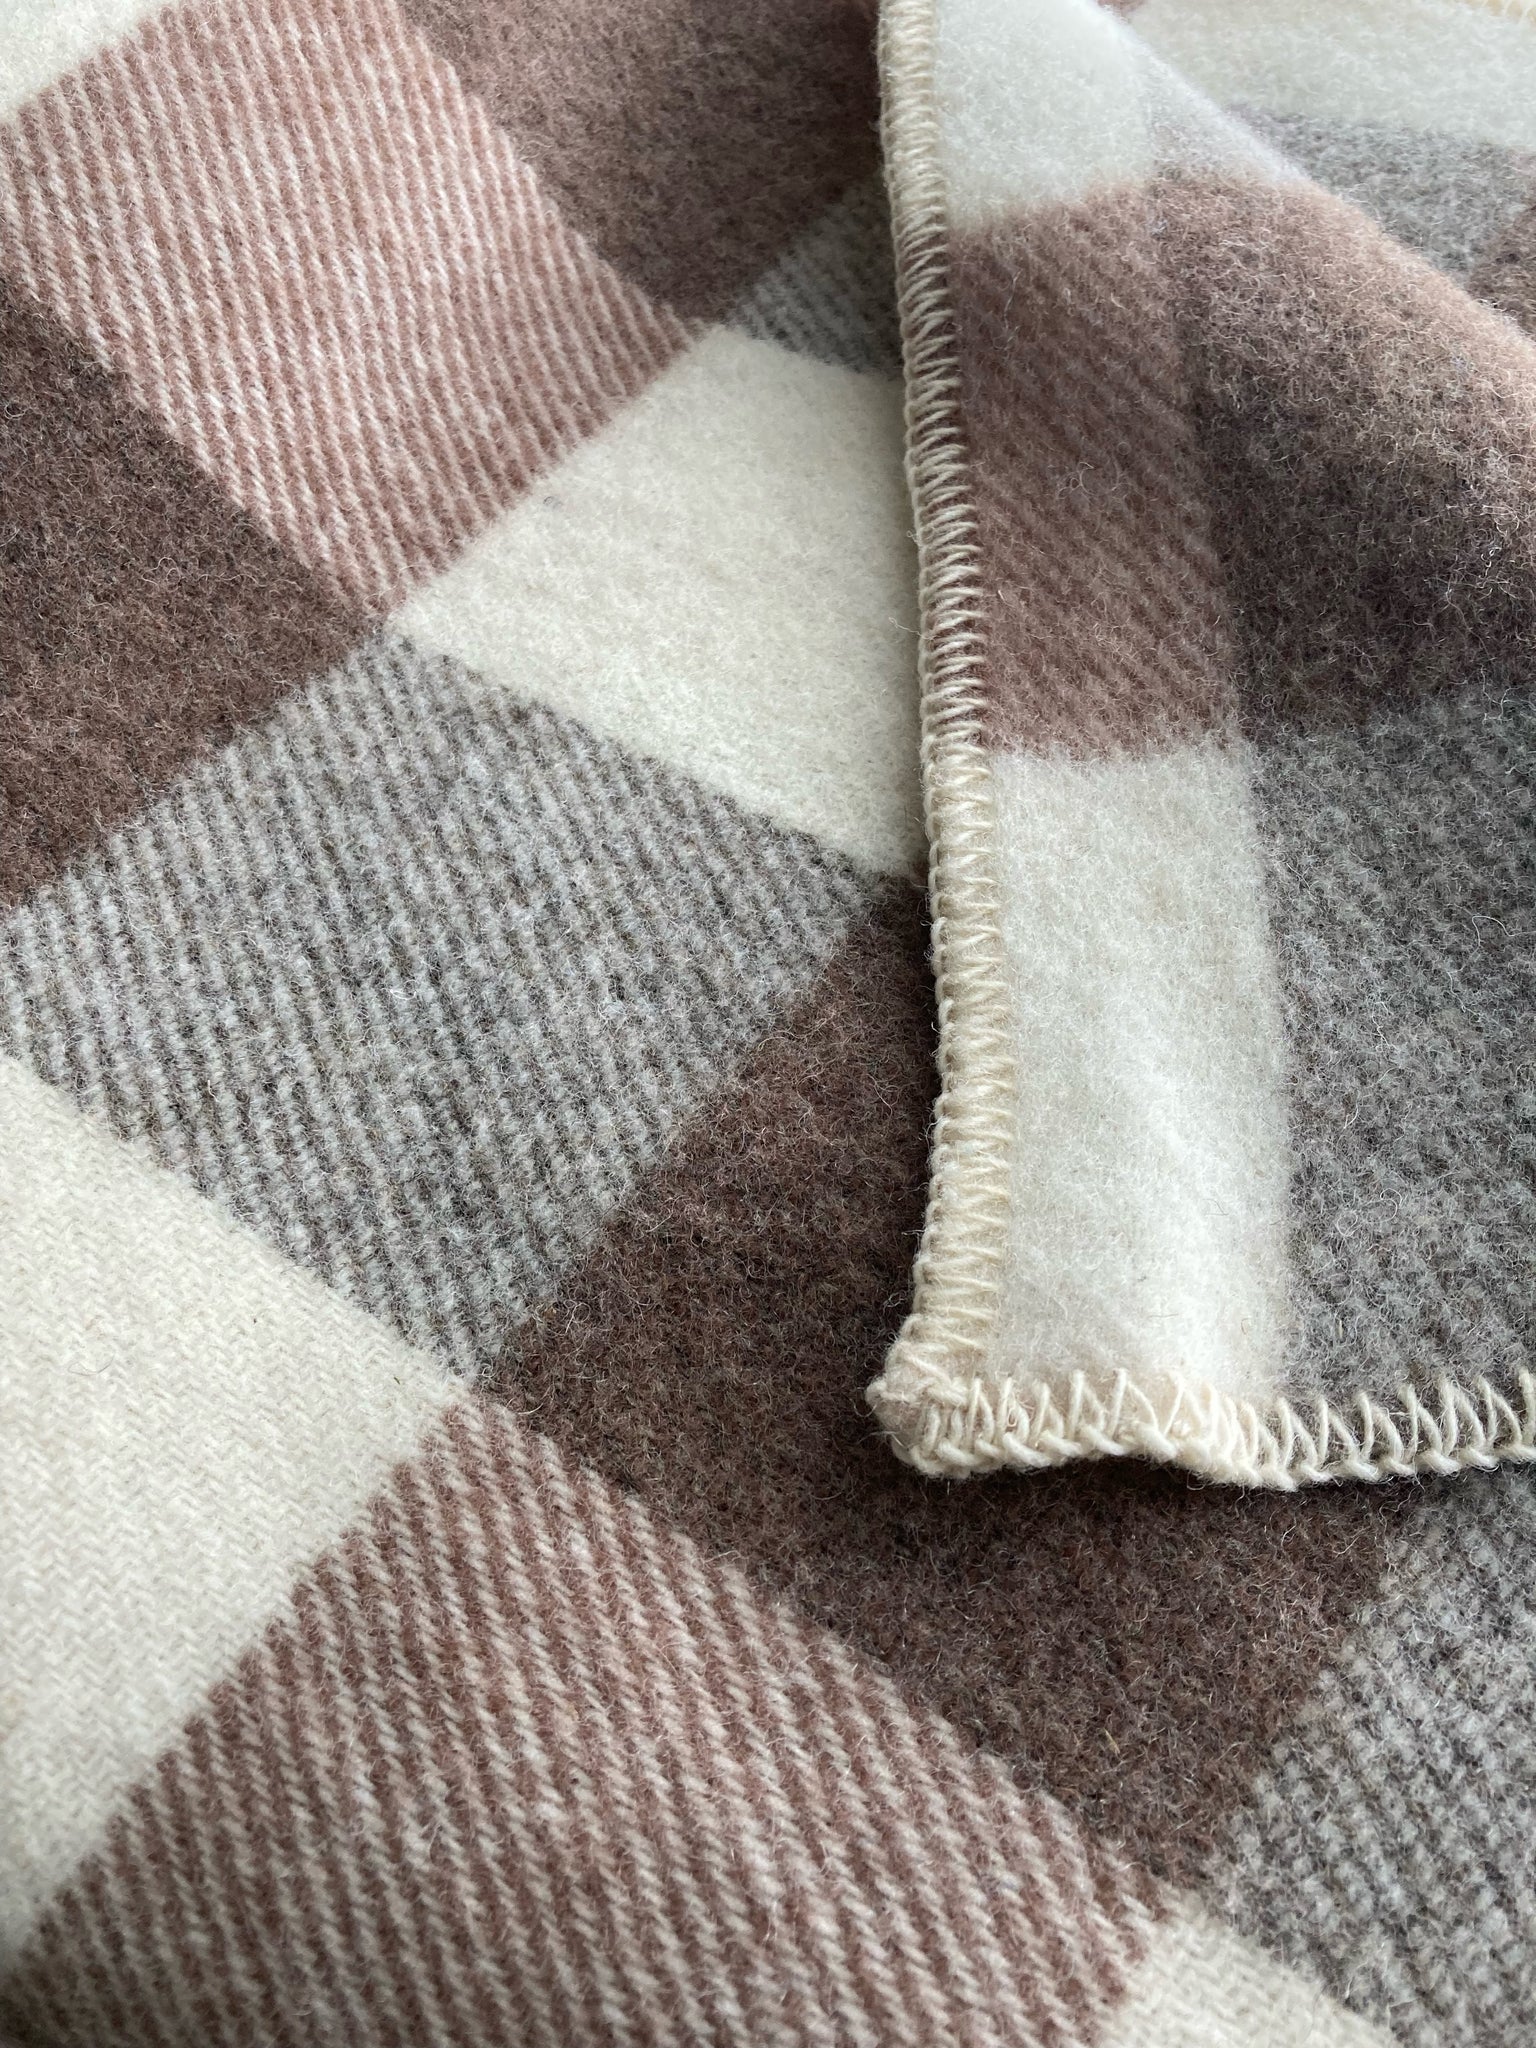 MacAusland's Checked Throw - Rosey Taupe & Cream